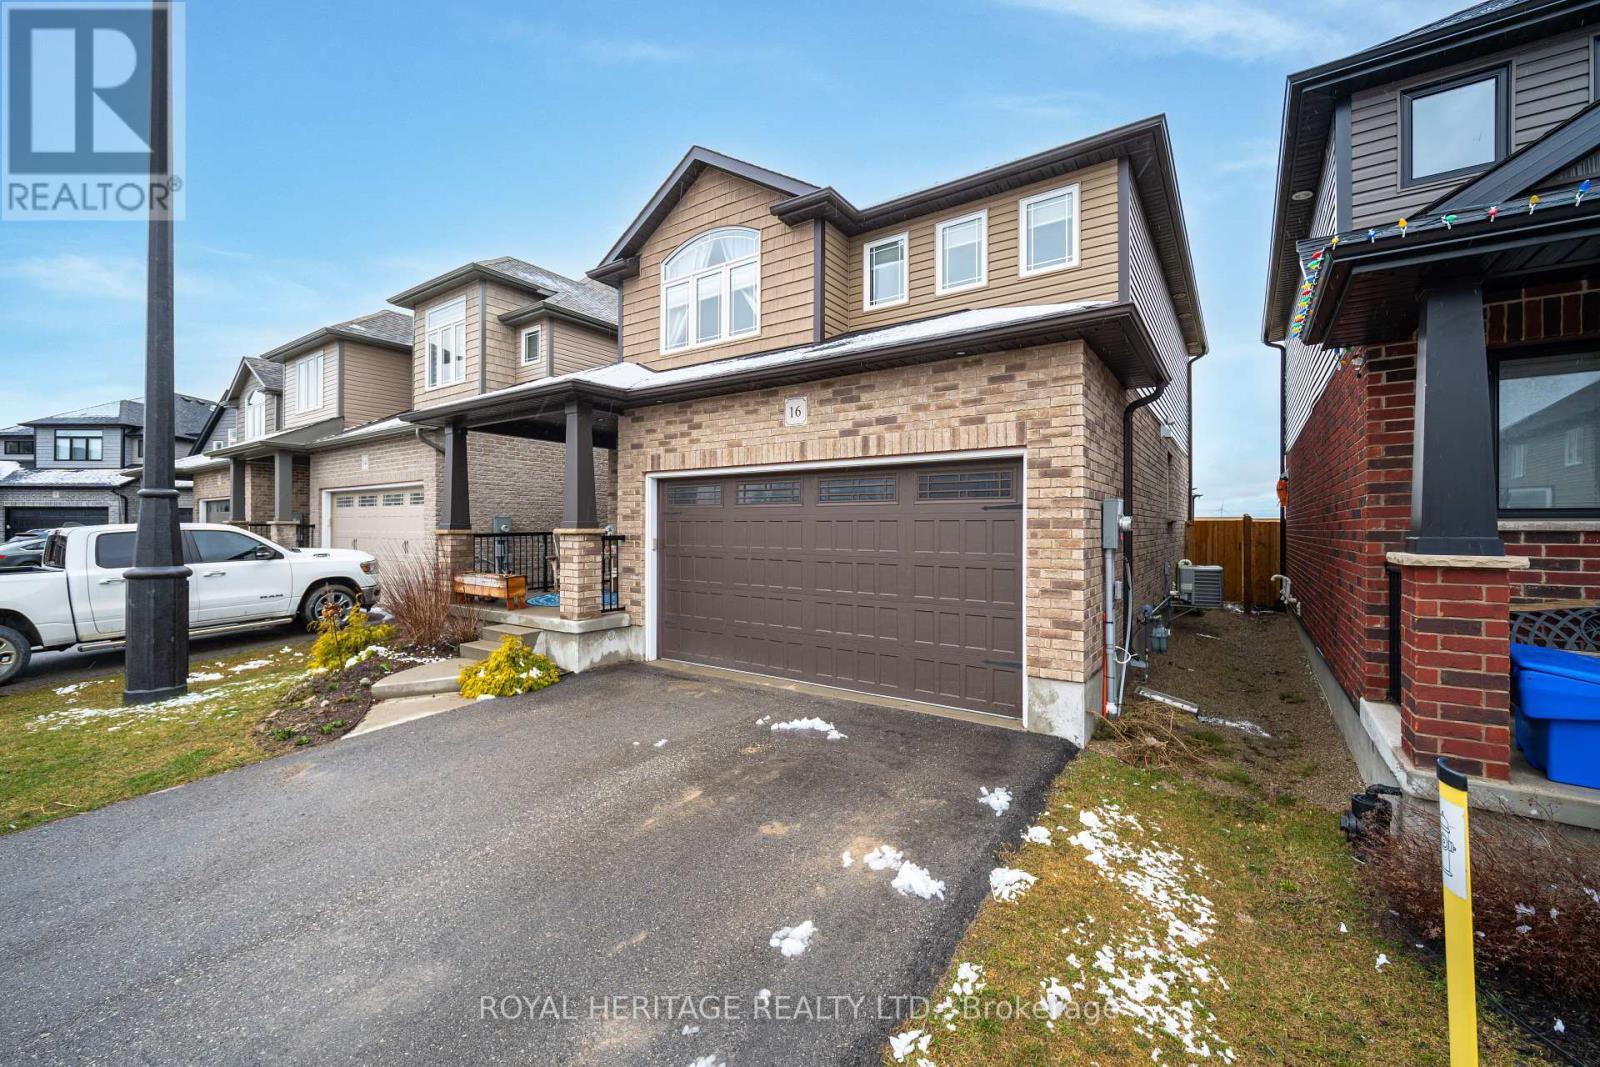 












16 SPARROW CRES

,
East Luther Grand Valley,




Ontario
L9W7P2

